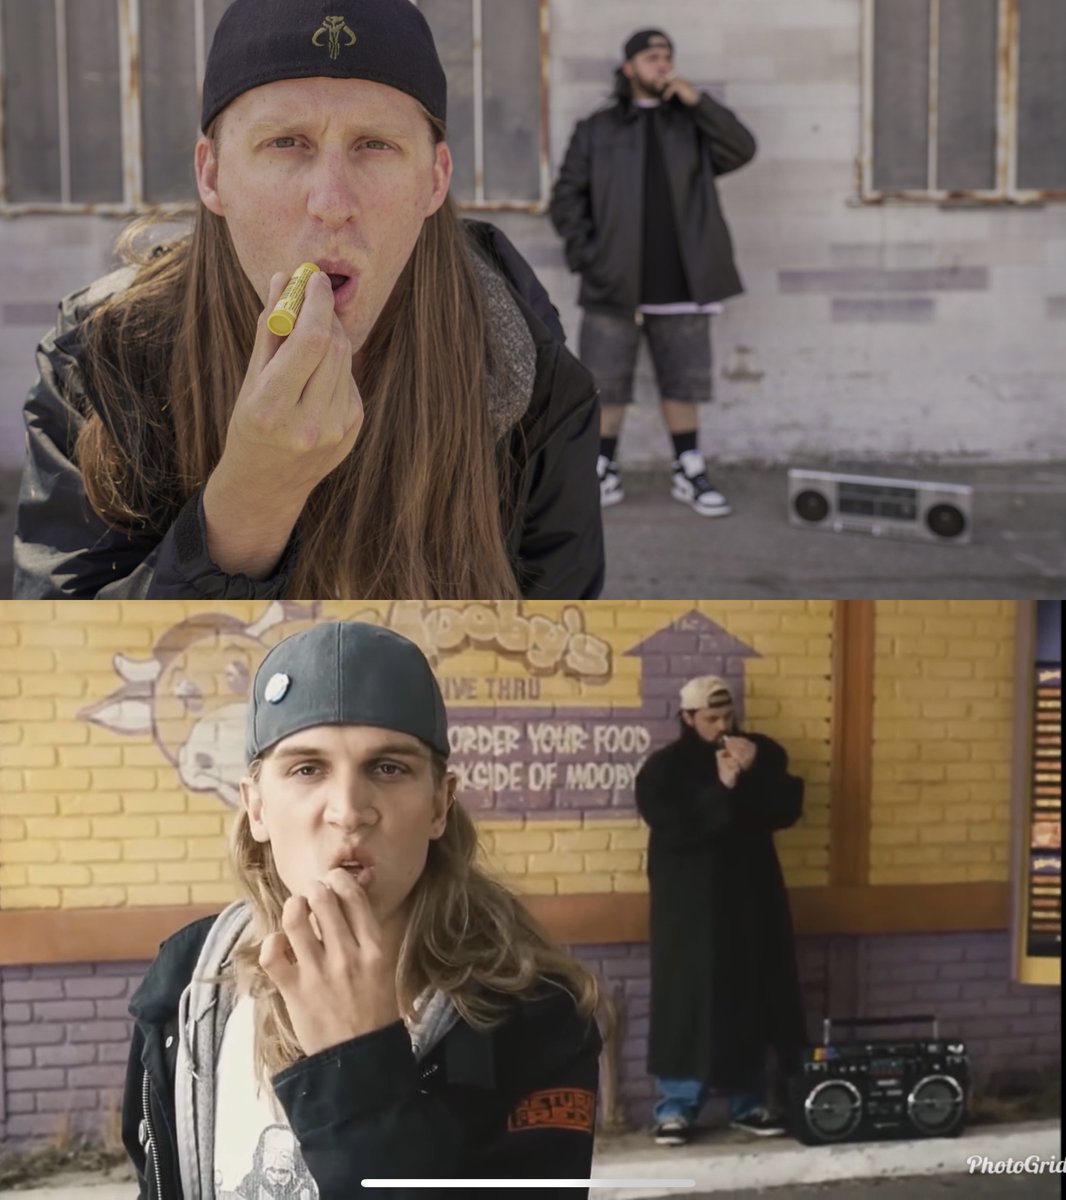 @JayMewes @ThatKevinSmith 
yesterday I shaved my beard so my buddy and I could do a #jayandsilentbob photoshoot outside a bar in Las Vegas ....turned out quite well
#jayandsilentbobreboot